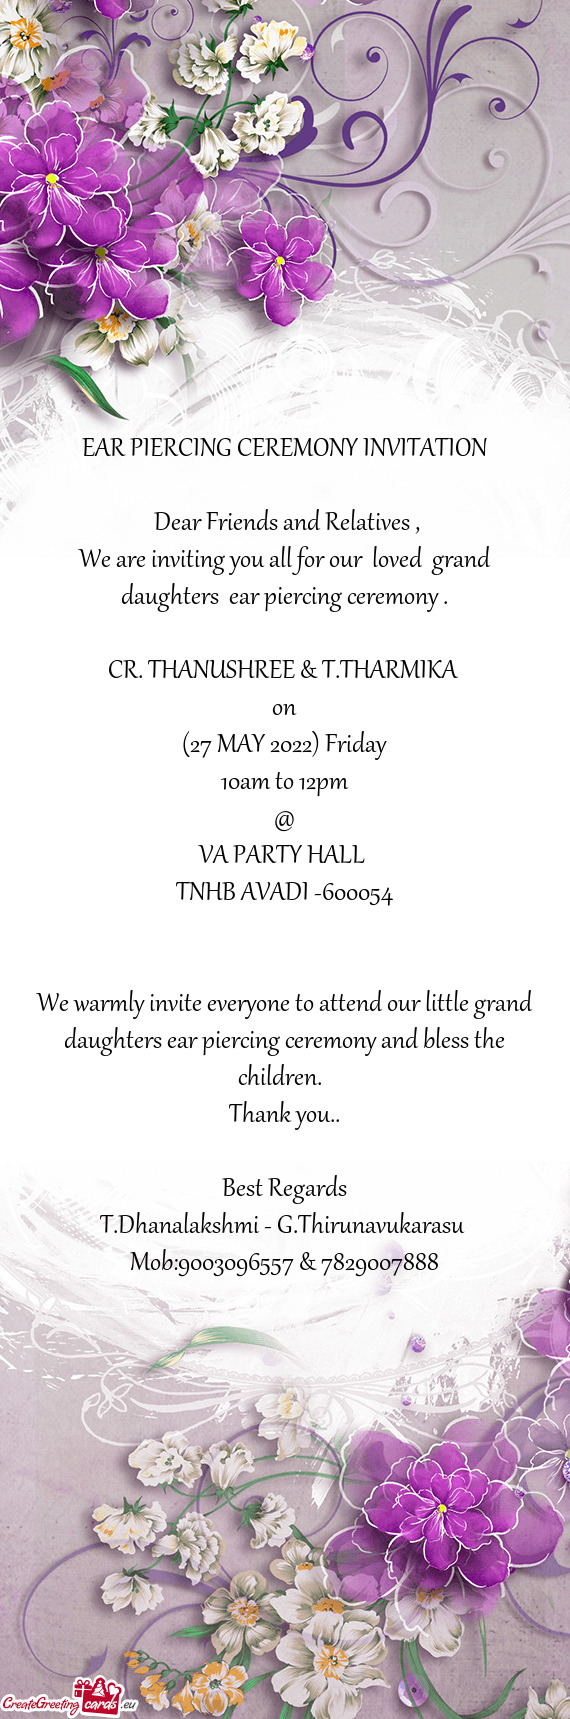 We are inviting you all for our loved grand daughters ear piercing ceremony